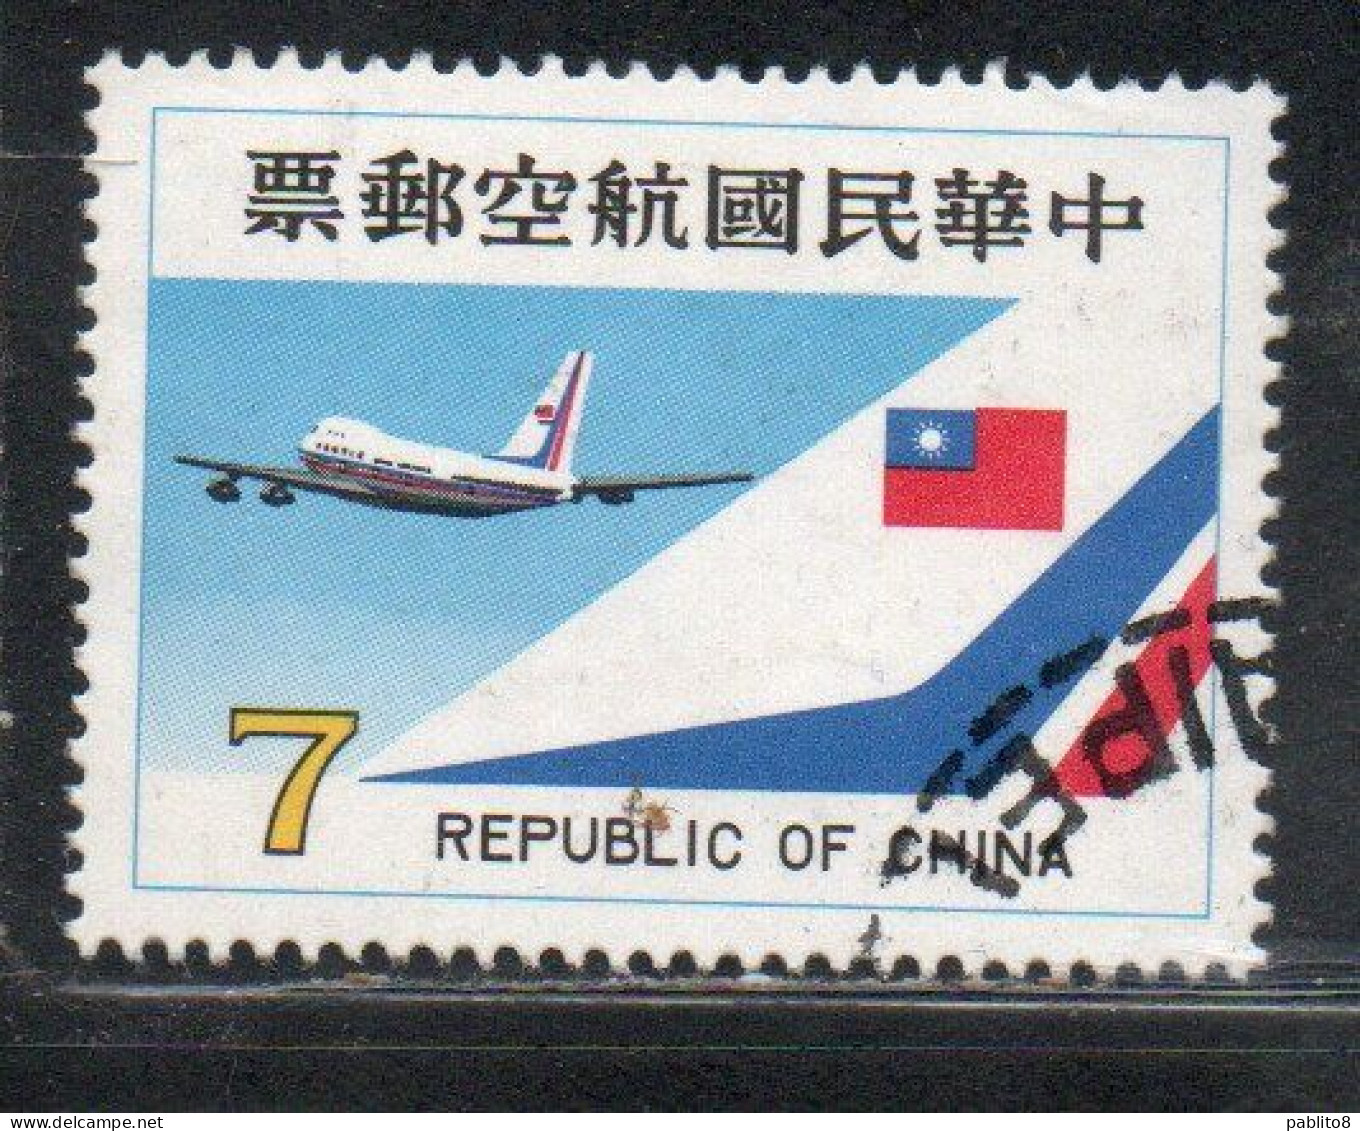 CHINA REPUBLIC CINA TAIWAN FORMOSA 1980 AIR POST MAIL AIRMAIL CHINA AIRLINES JET 7$ USED USATO OBLITERE' - Luchtpost